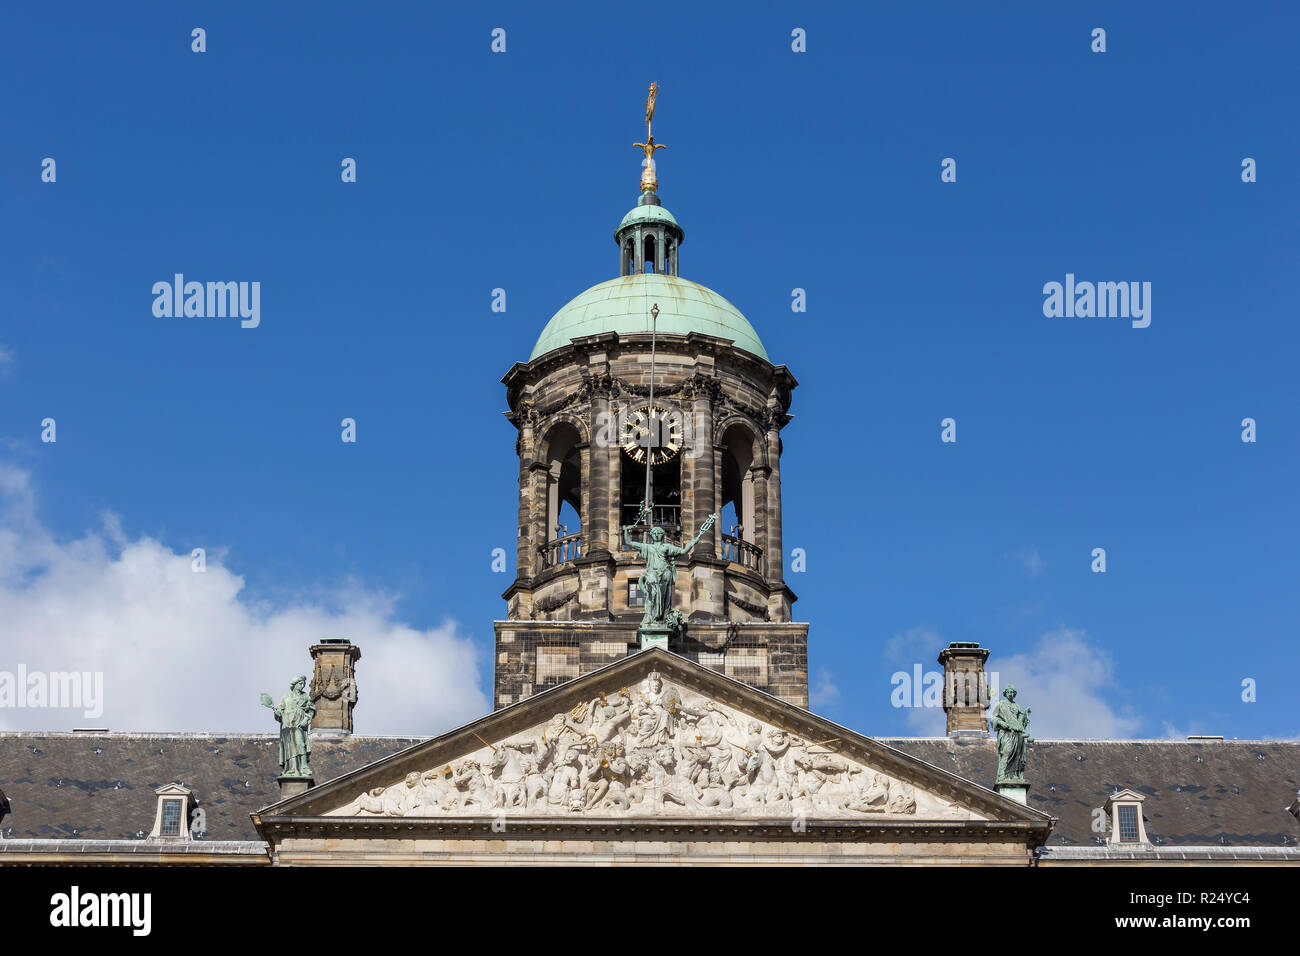 Bell Tower Of The Royal Palace (Koninklijk Paleis) In Amsterdam, Netherlands Stock Photo